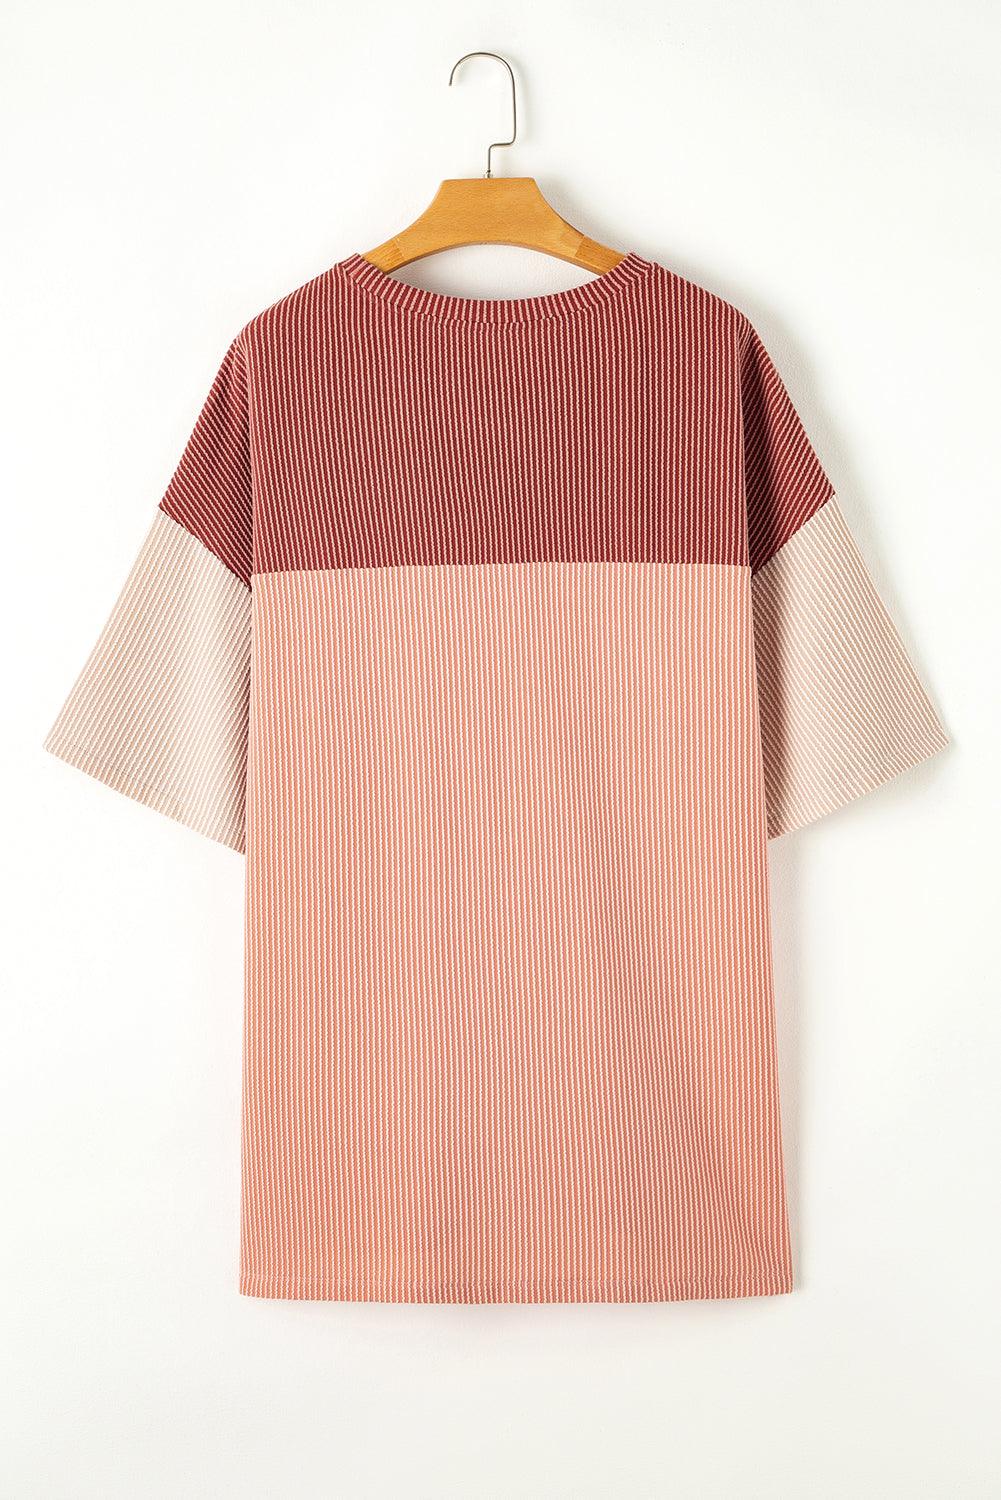 Rose Pink Plus Size Ribbed Colorblock T-shirt